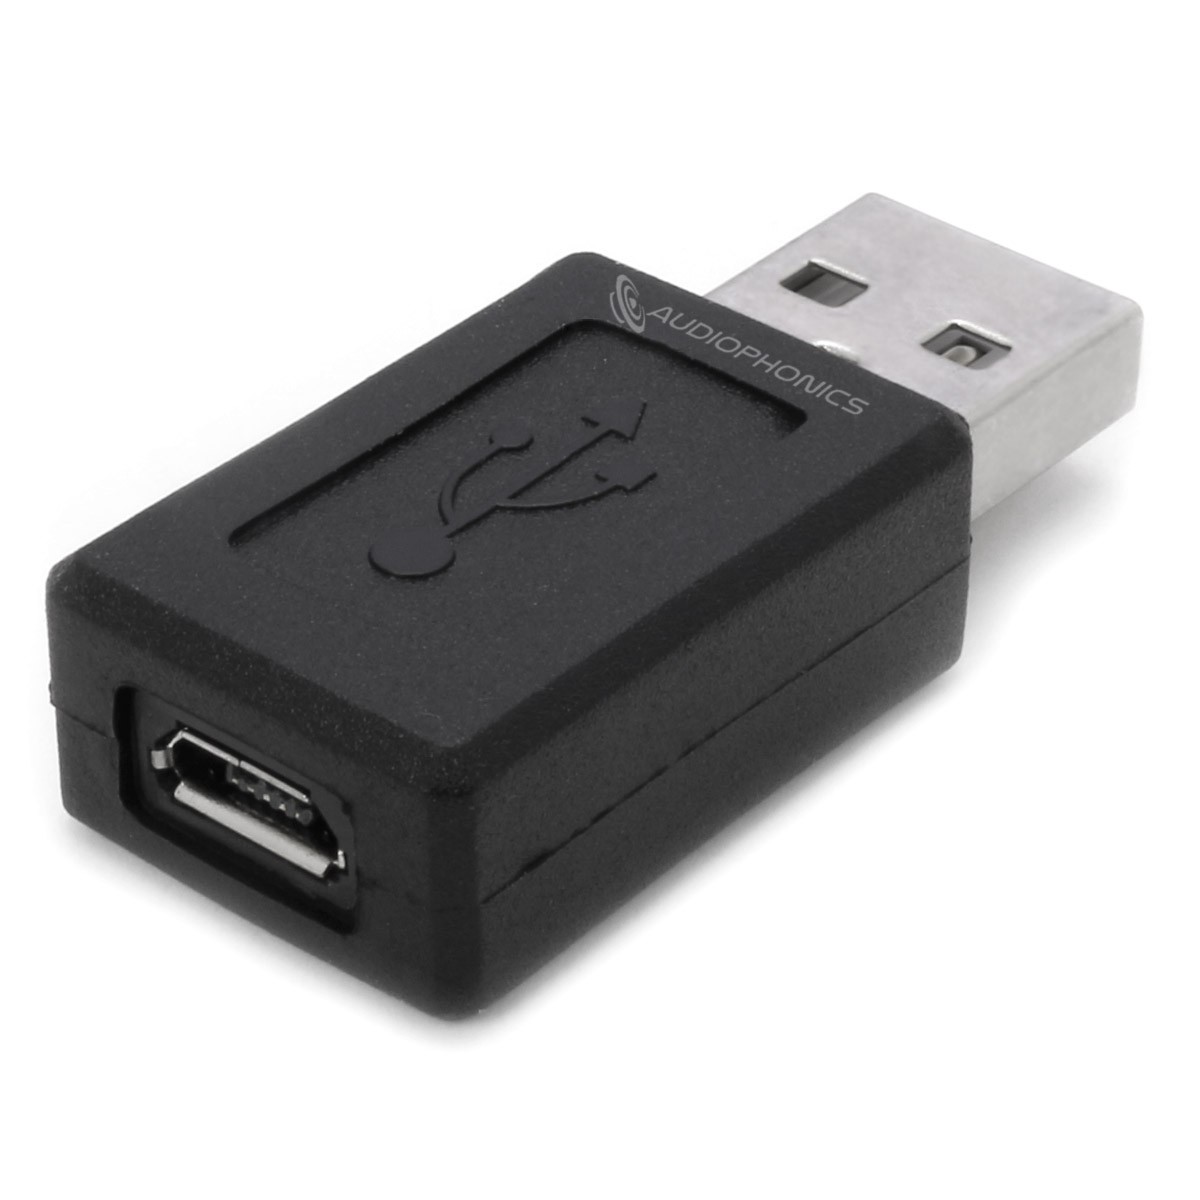 Female Micro USB to Male USB-A Adapter